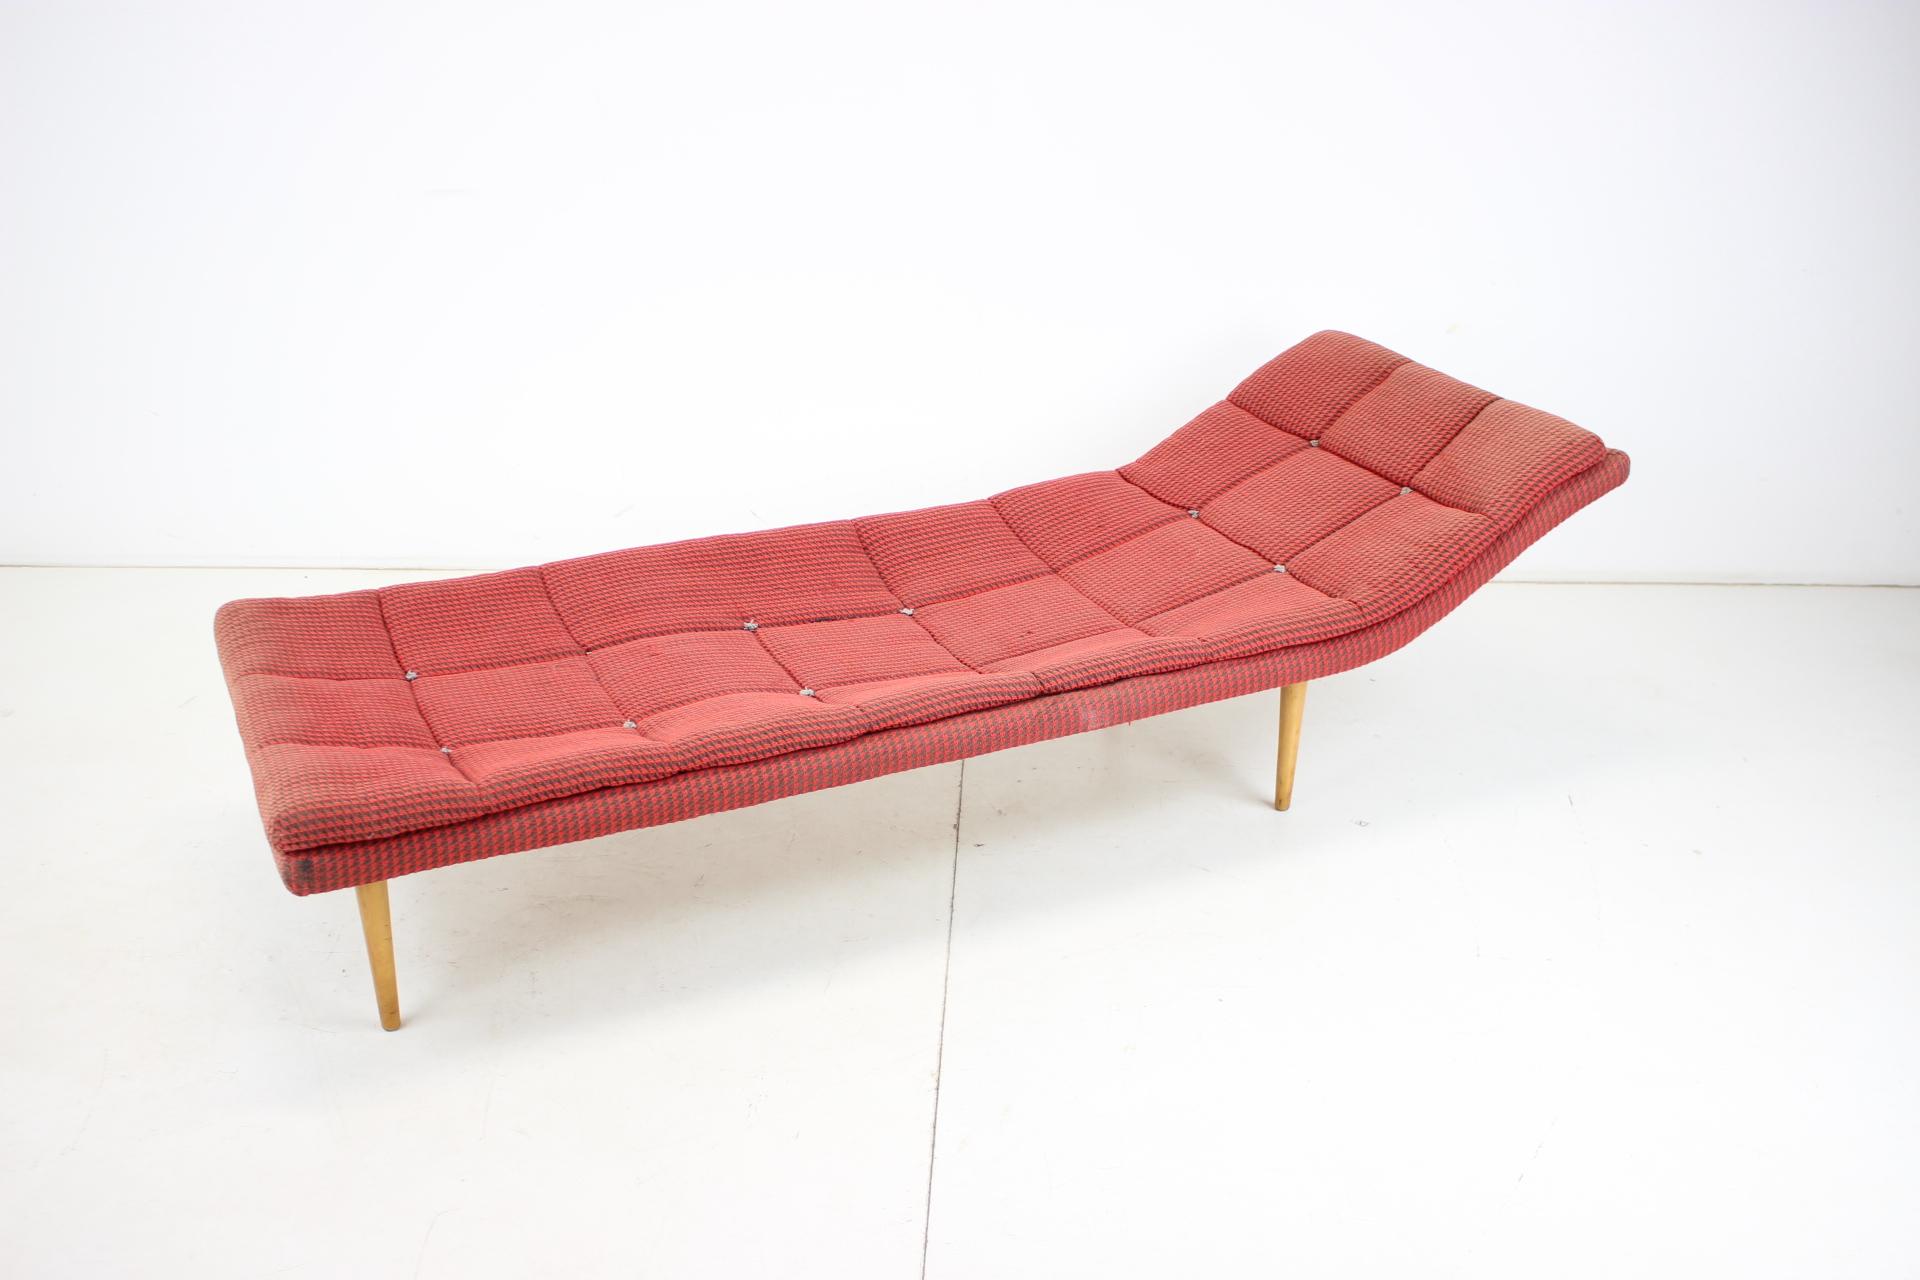 Made in Czechoslovakia
Rare model
Made of fabric, wood
The fabric shows signs of age
Measures: Height 34 cm, height of the lounger at the head 55 cm
Original state.